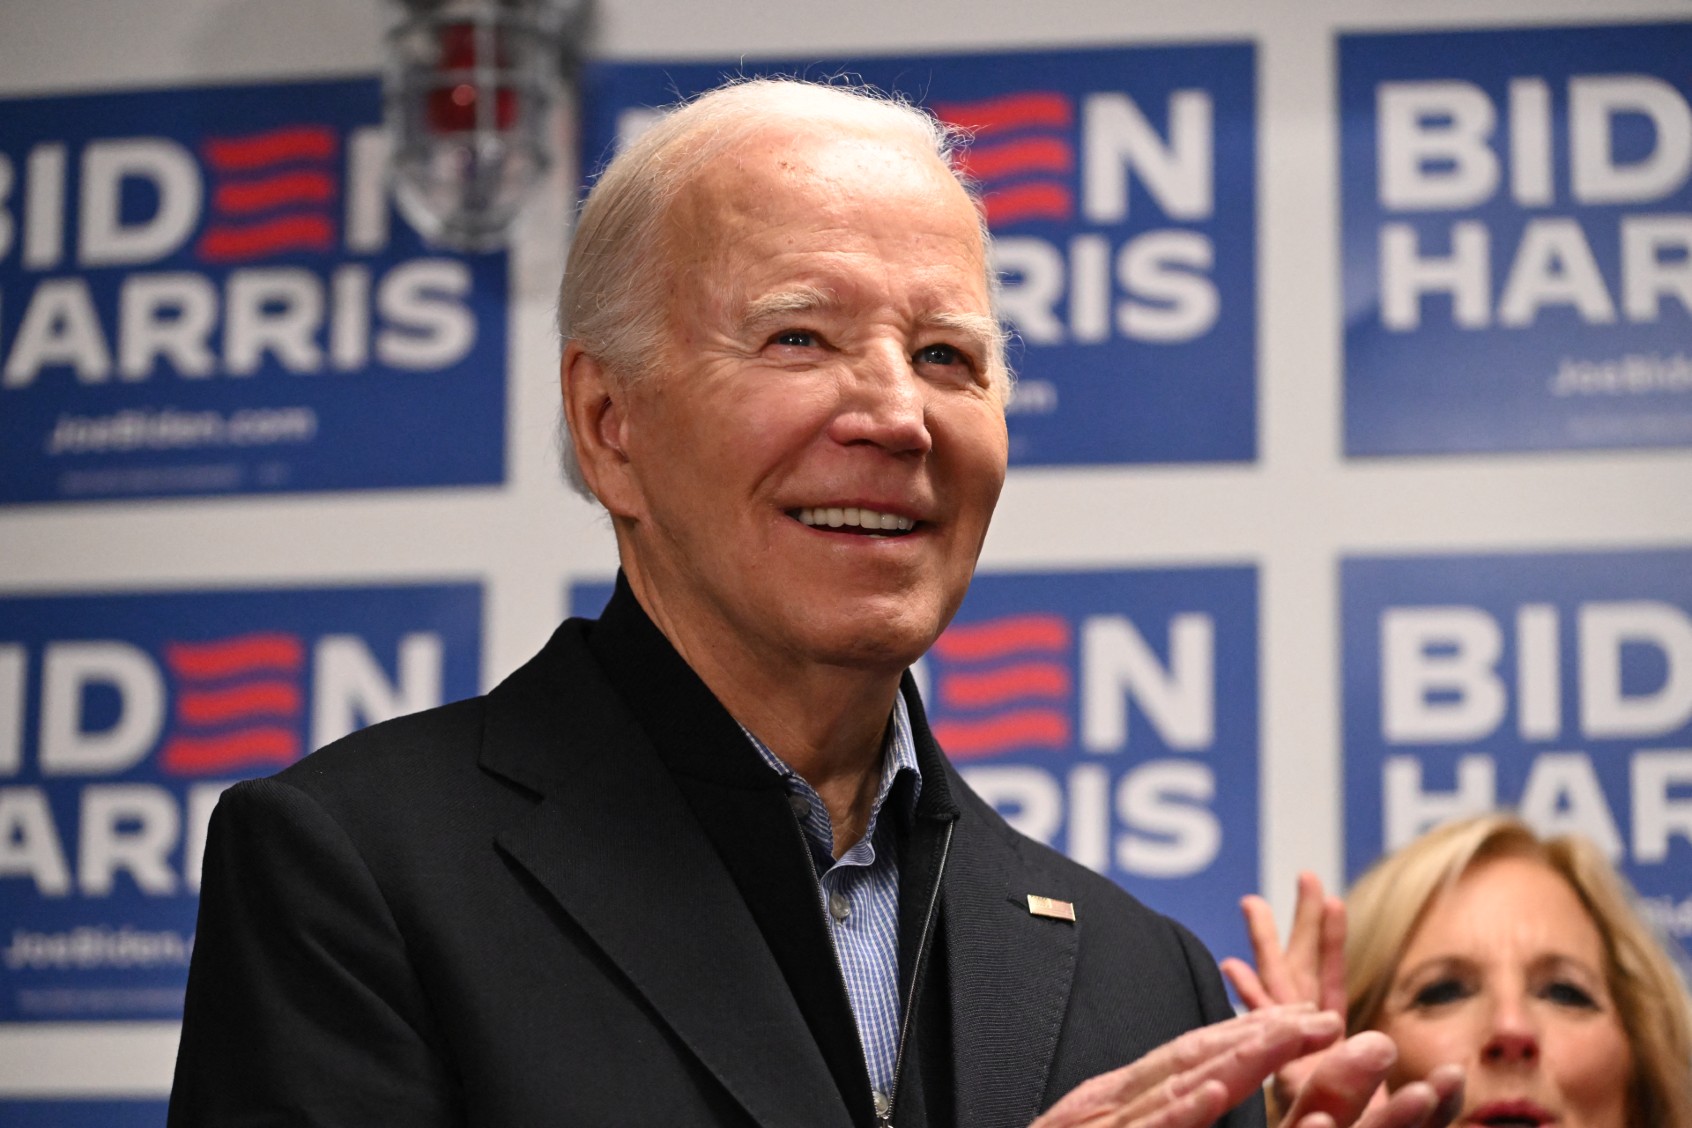 Joe Biden opting out of Super Bowl interview for second year in a row